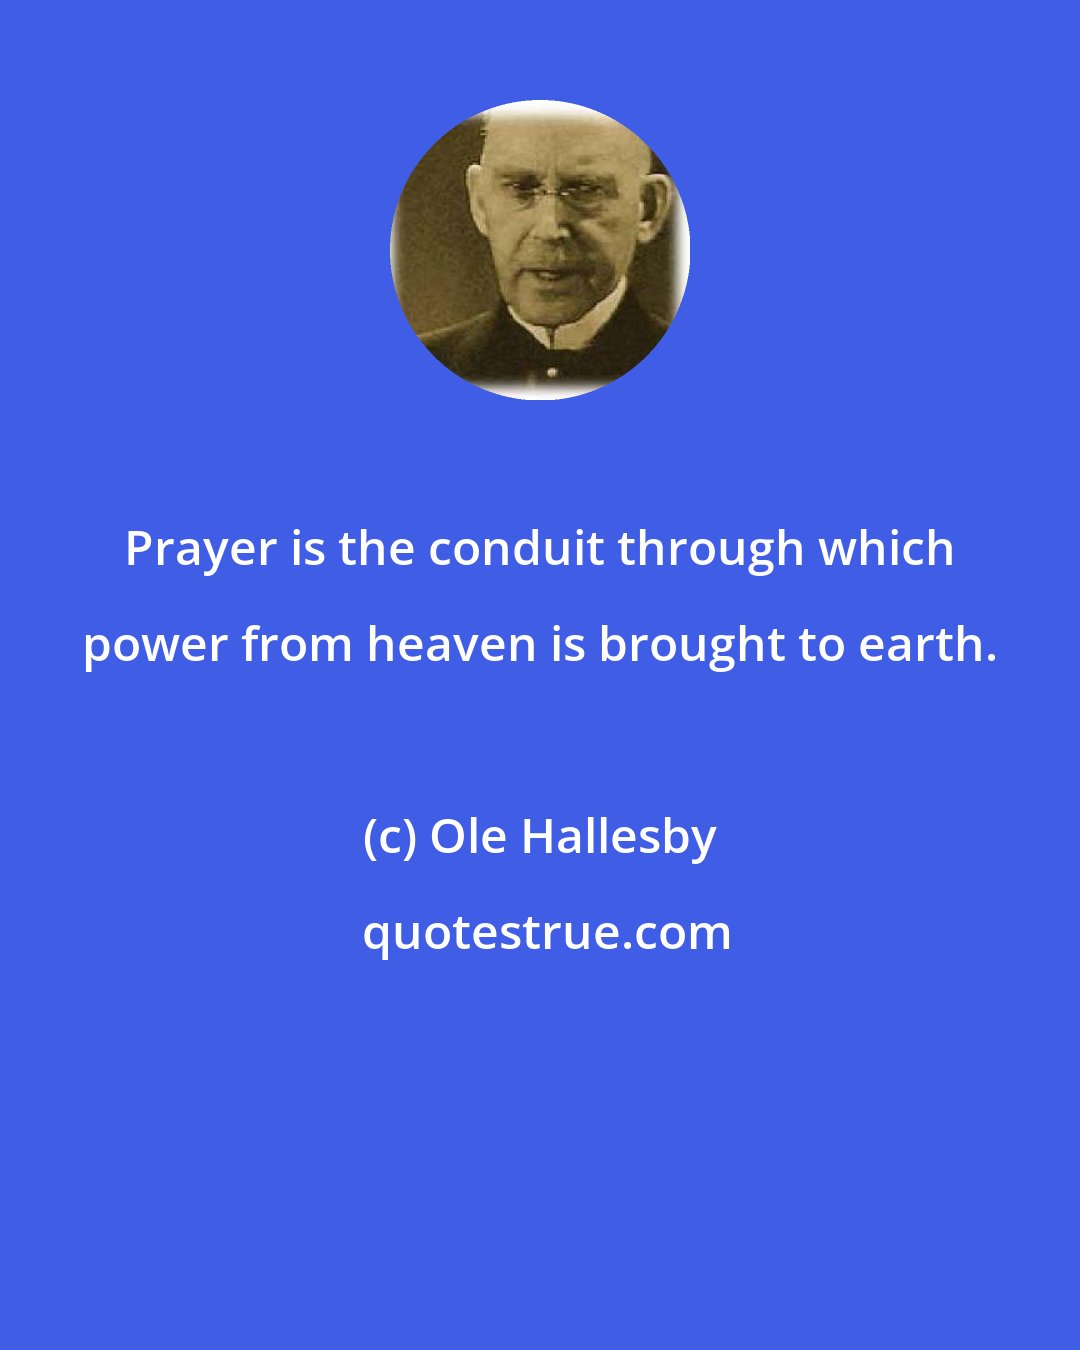 Ole Hallesby: Prayer is the conduit through which power from heaven is brought to earth.